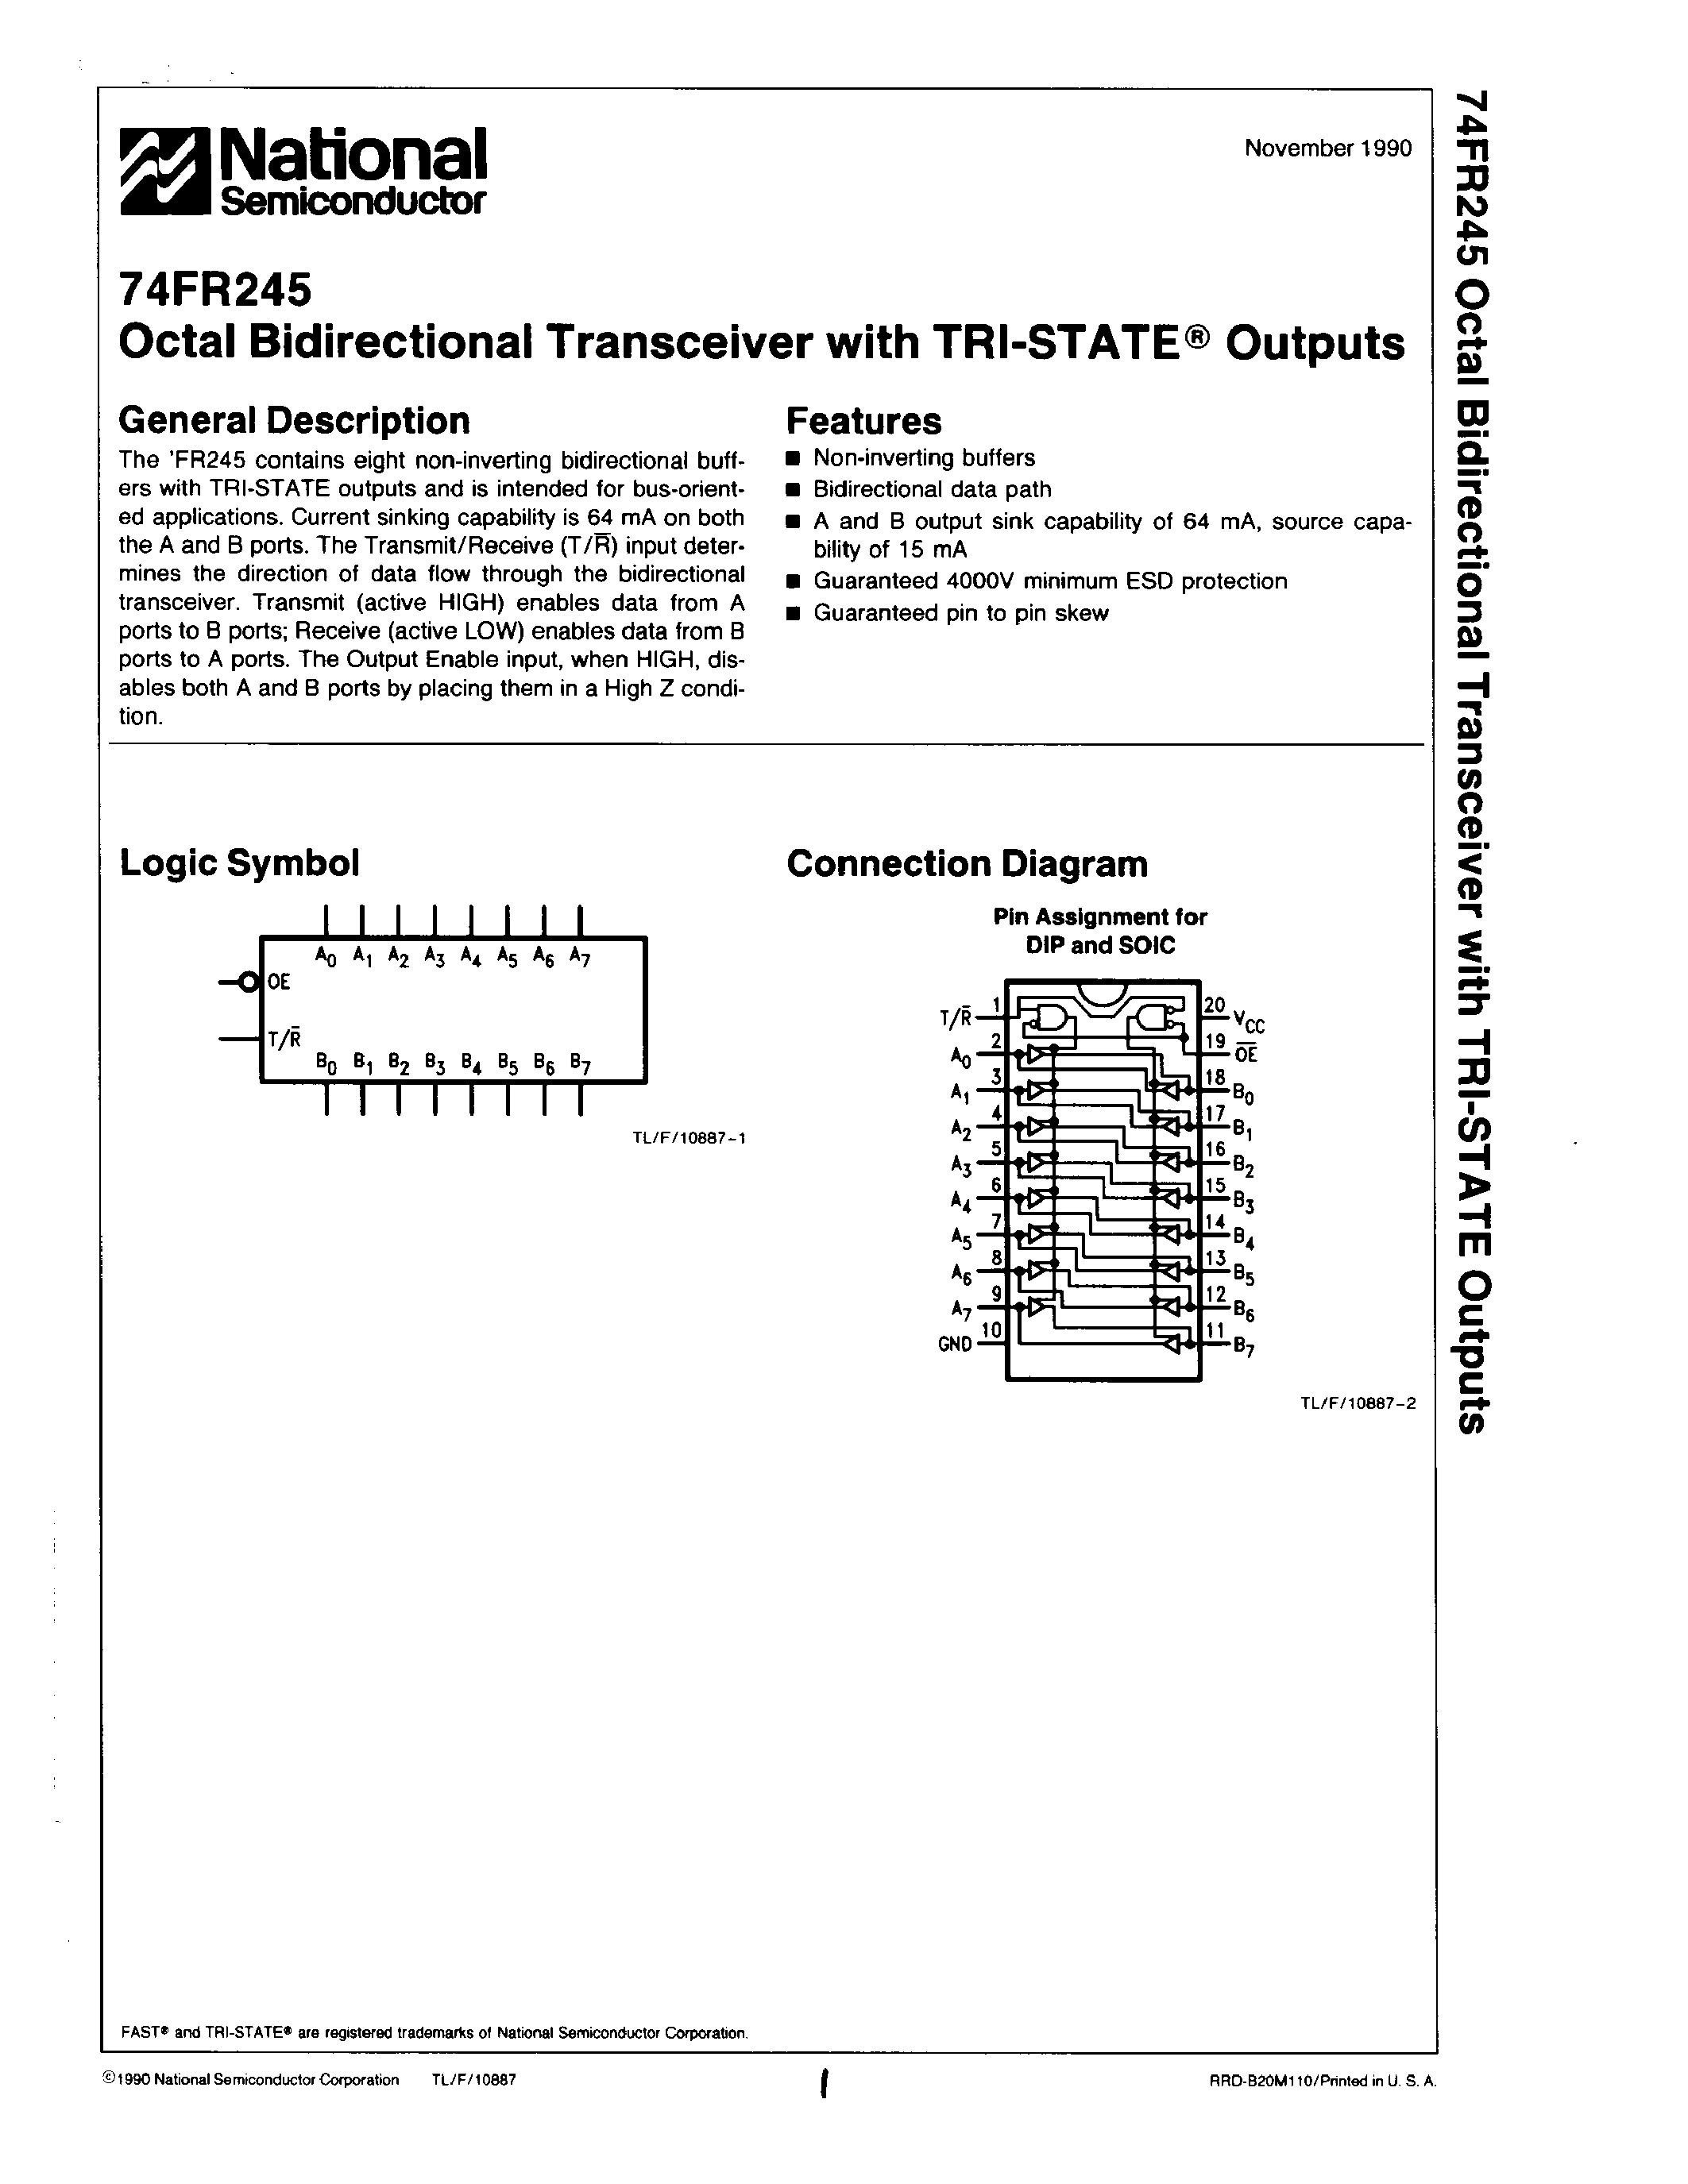 Даташит 74FR245P - Octal Bidirectional Transceiver with TRI-STATE Outputs страница 1